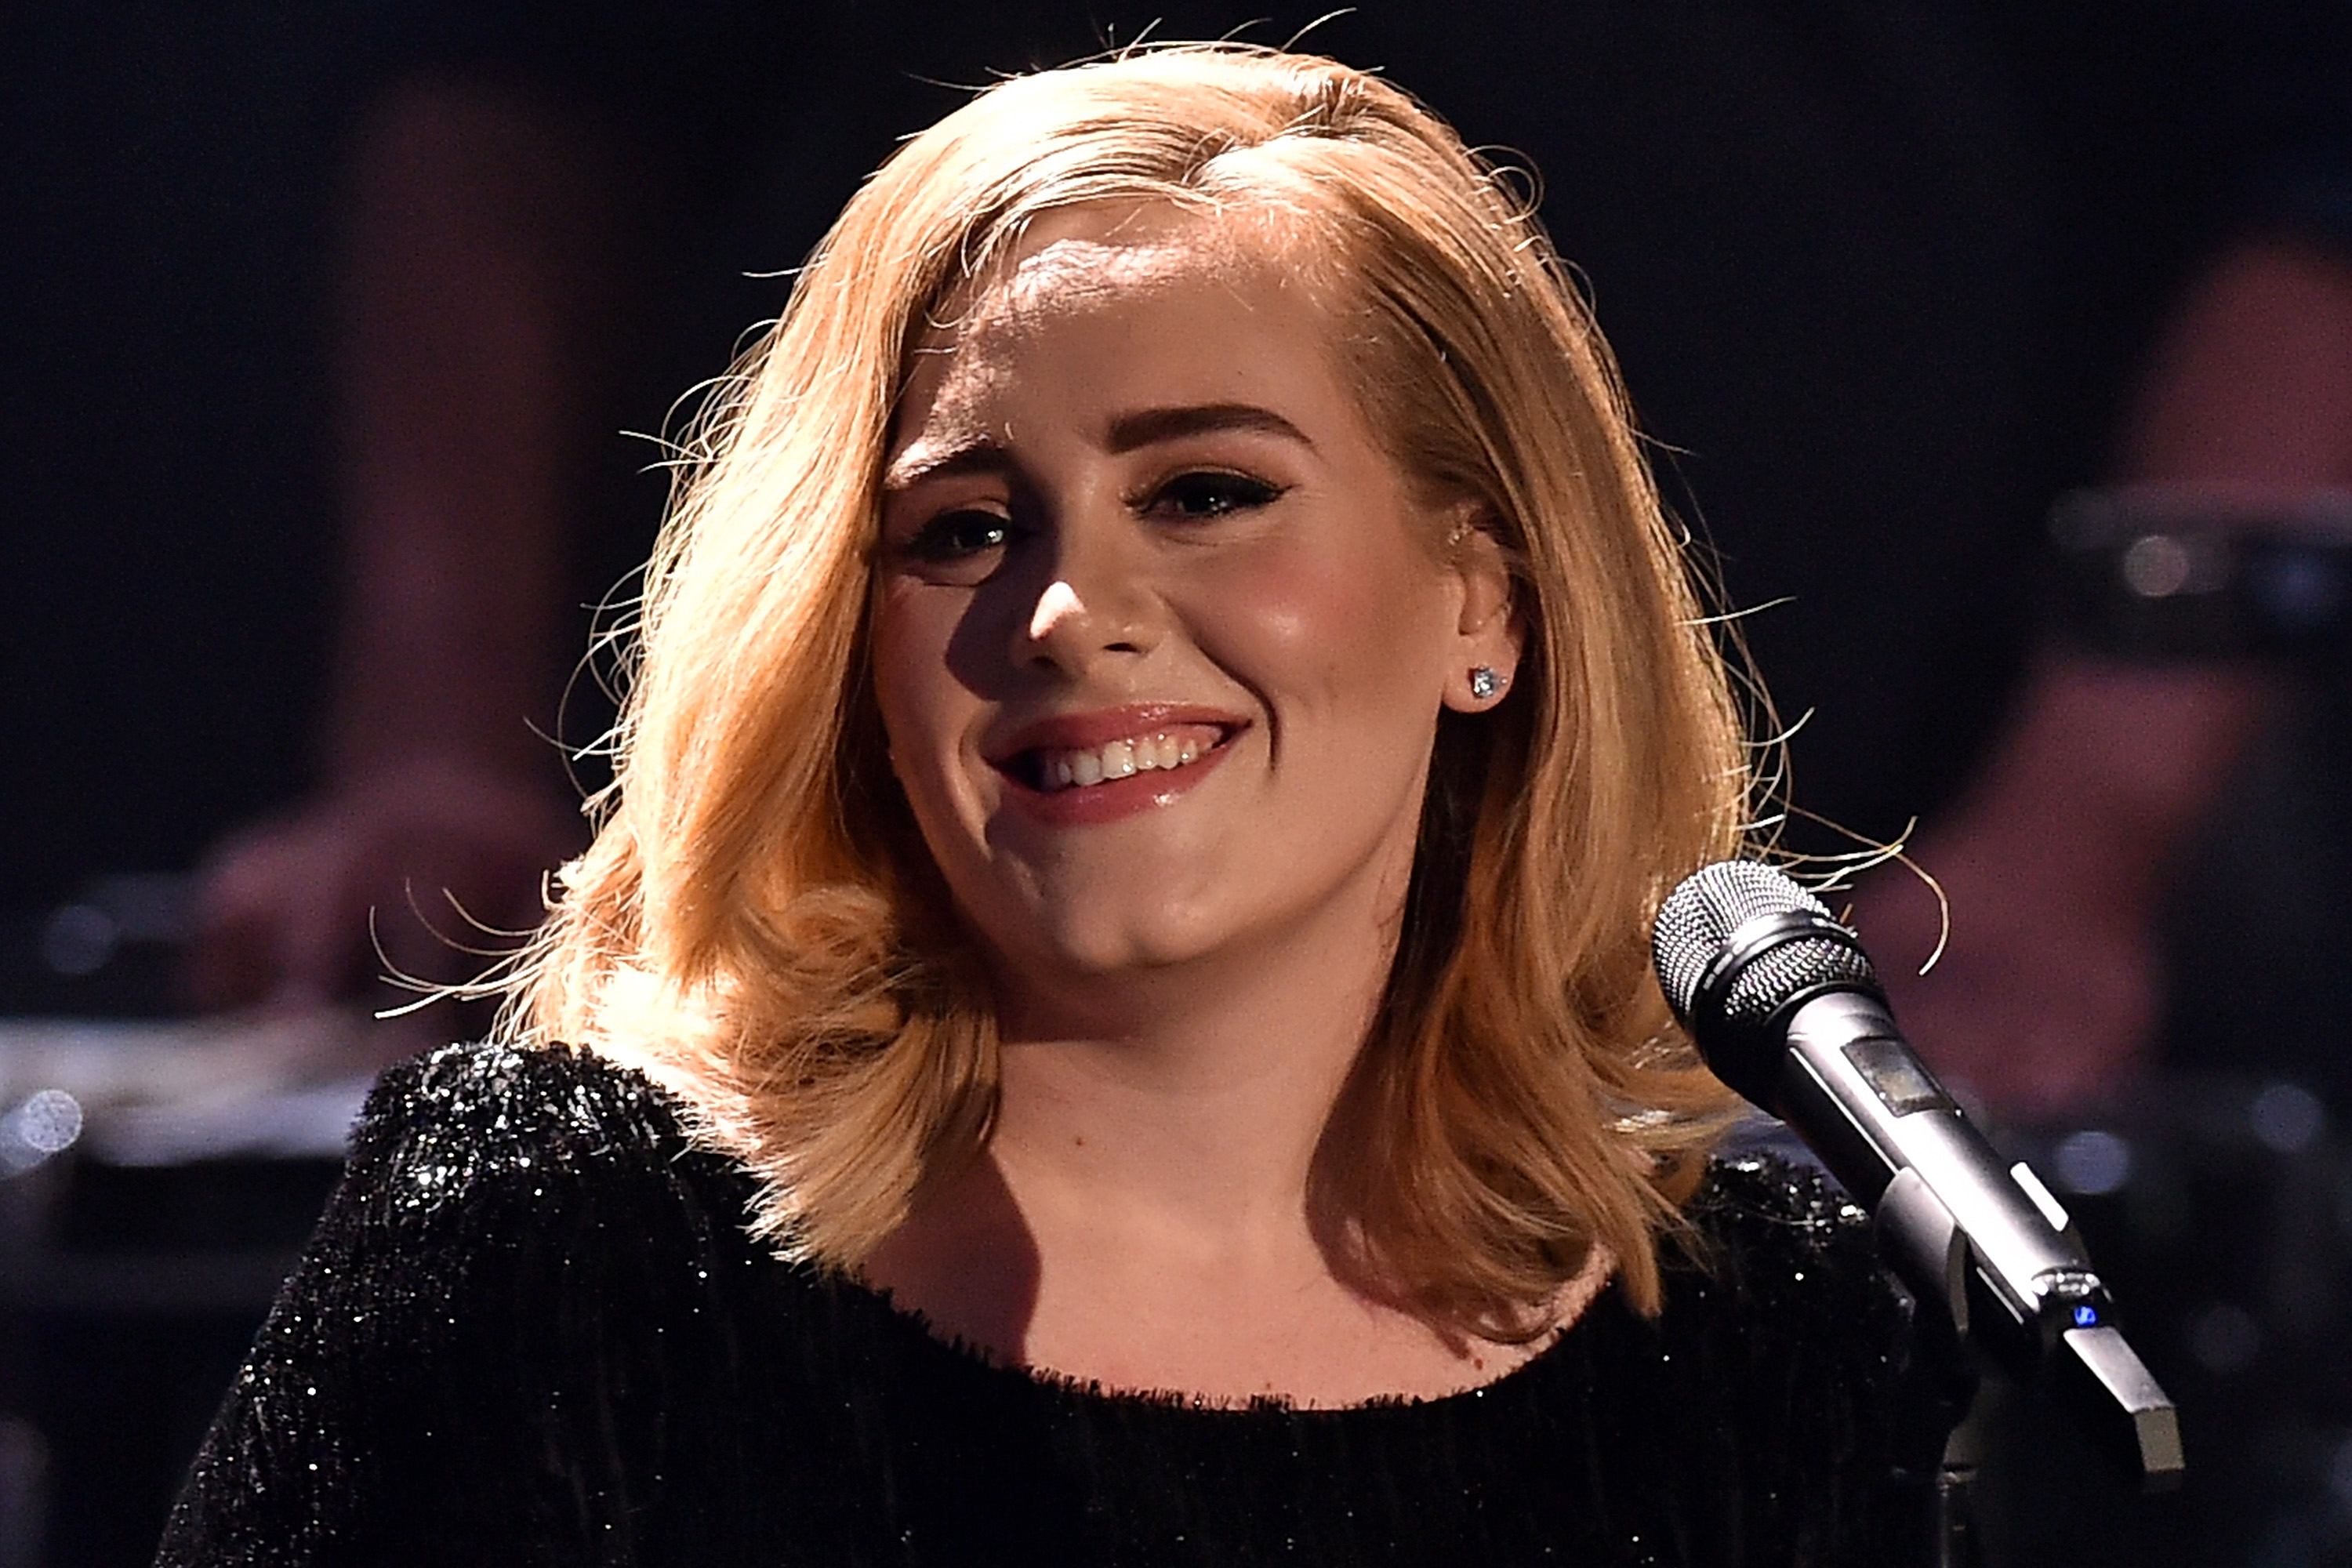 Adele performs on television in Cologne, Germany on Dec. 6, 2015. (Sascha Steinbach—Getty Images)